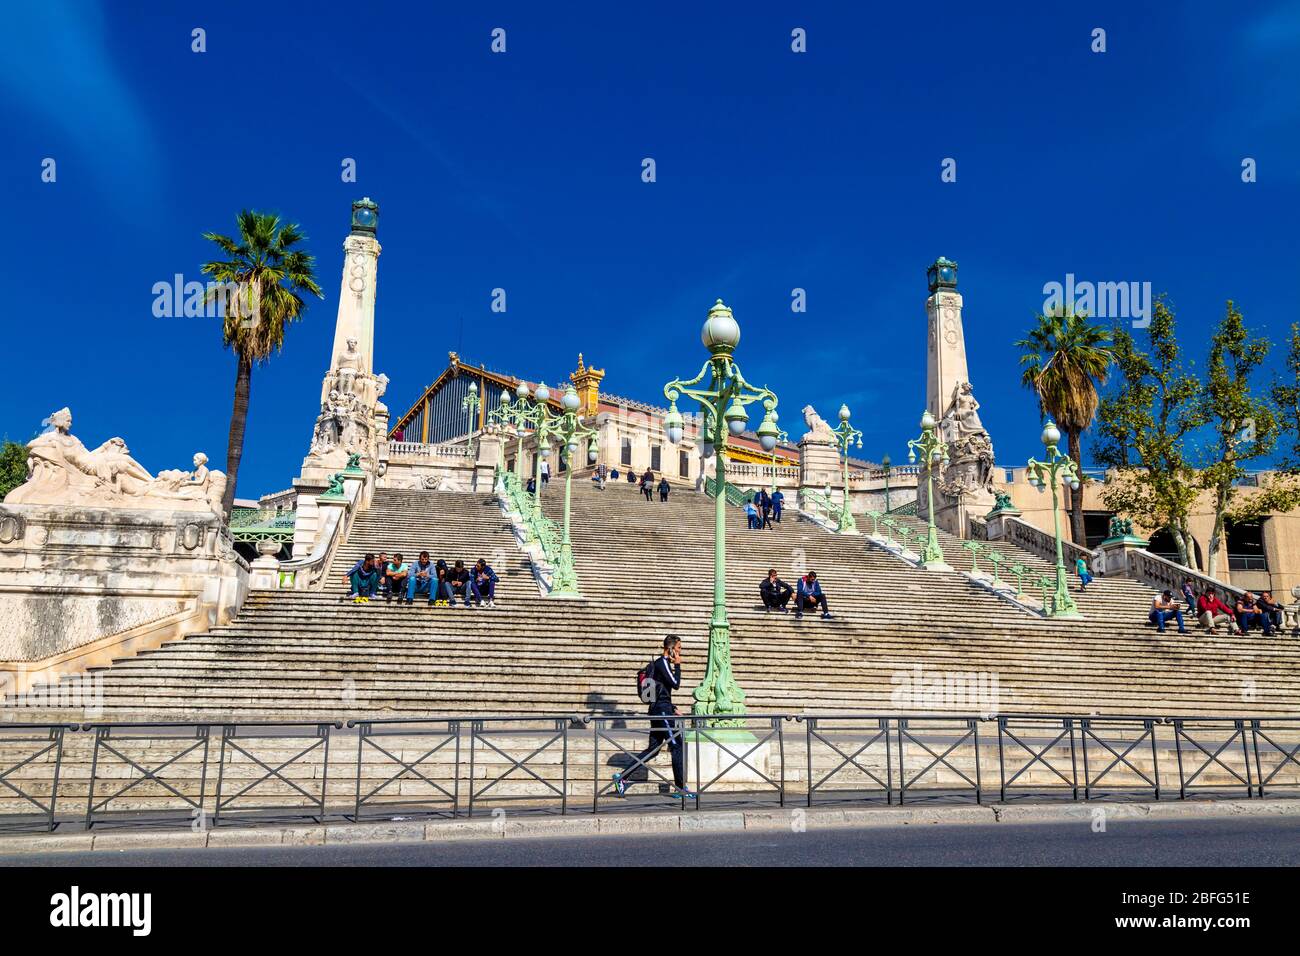 People sitting on stairs outside train station building Gare de Marseille-Saint-Charles, Marseille, France Stock Photo